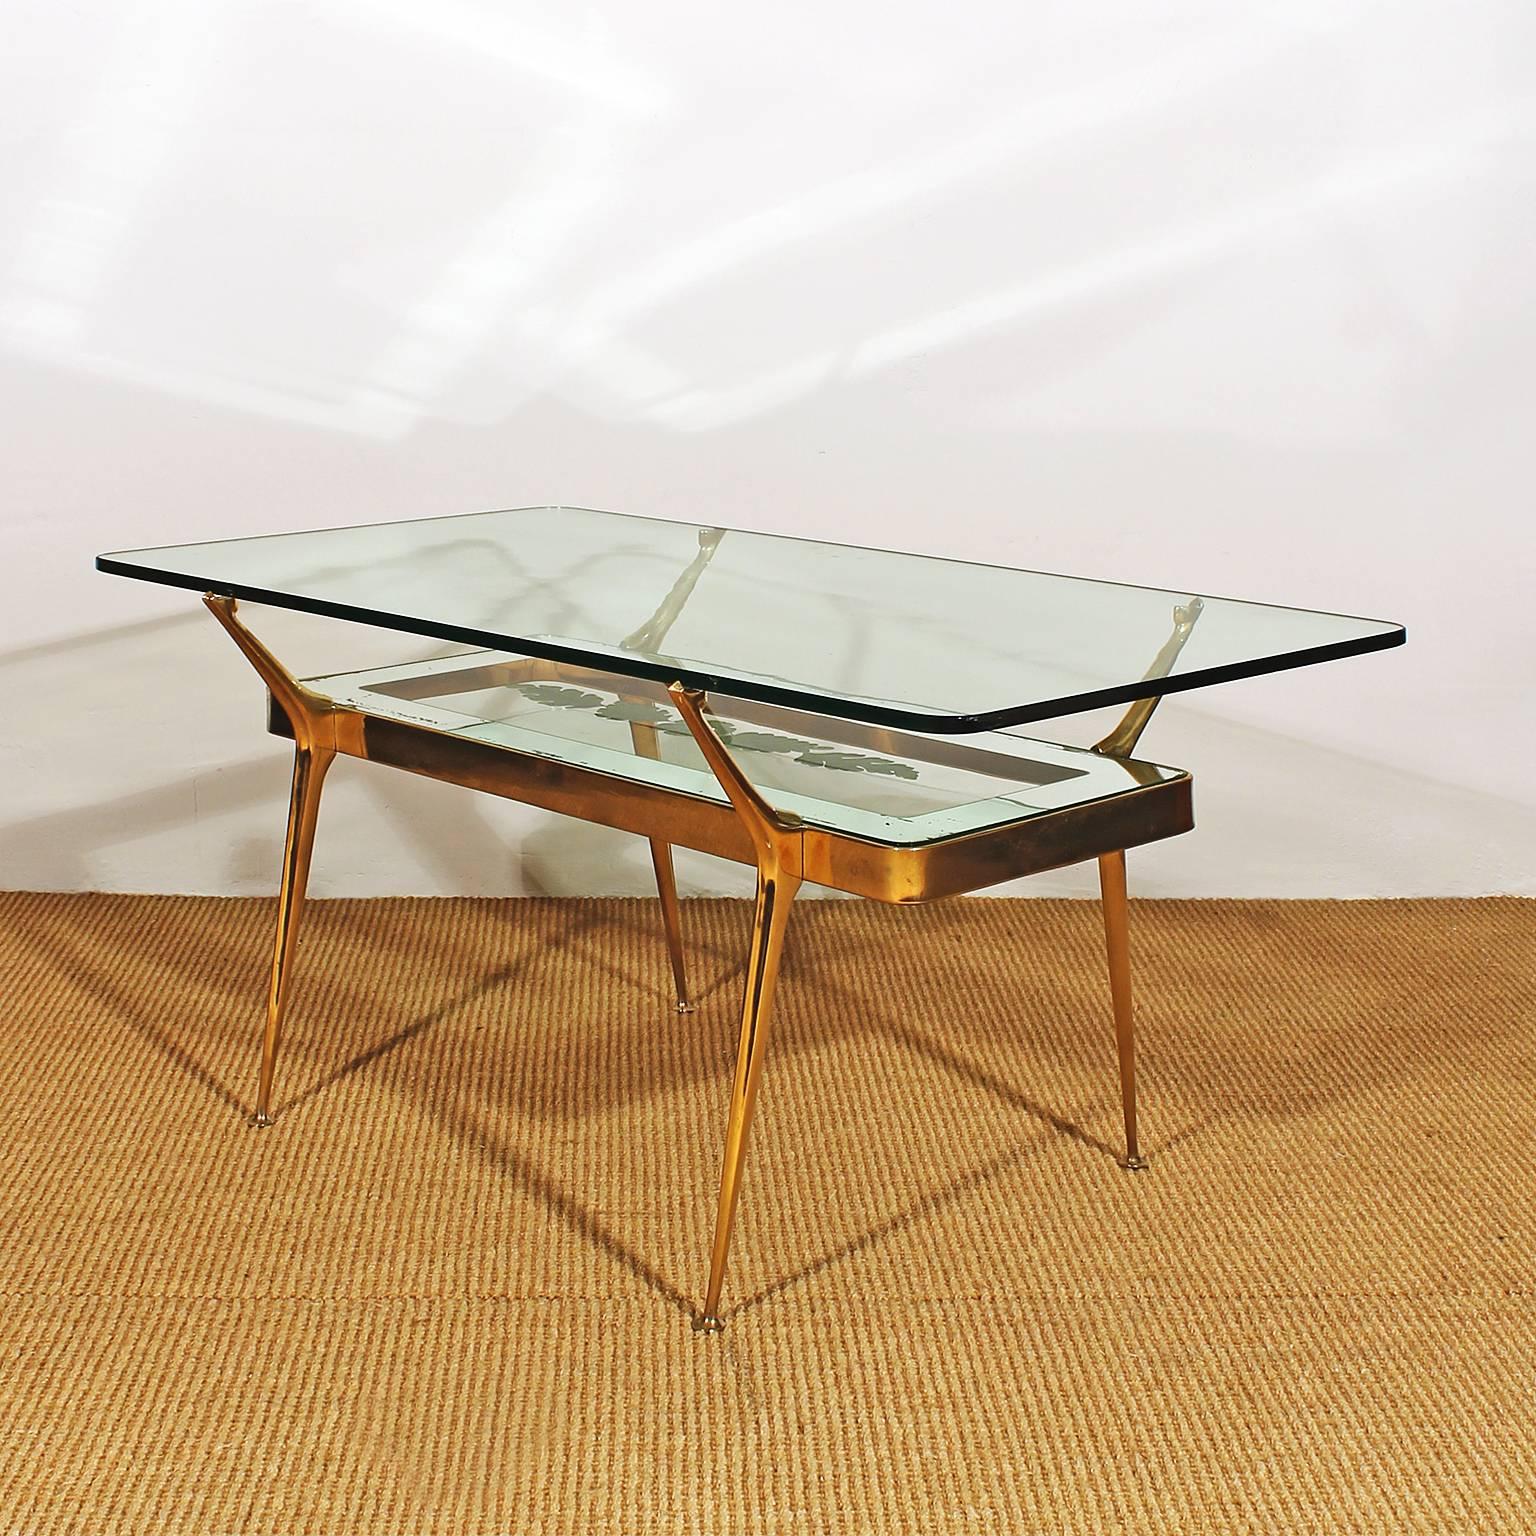 Mid-Century Modern Italian coffee table from the 1950´s